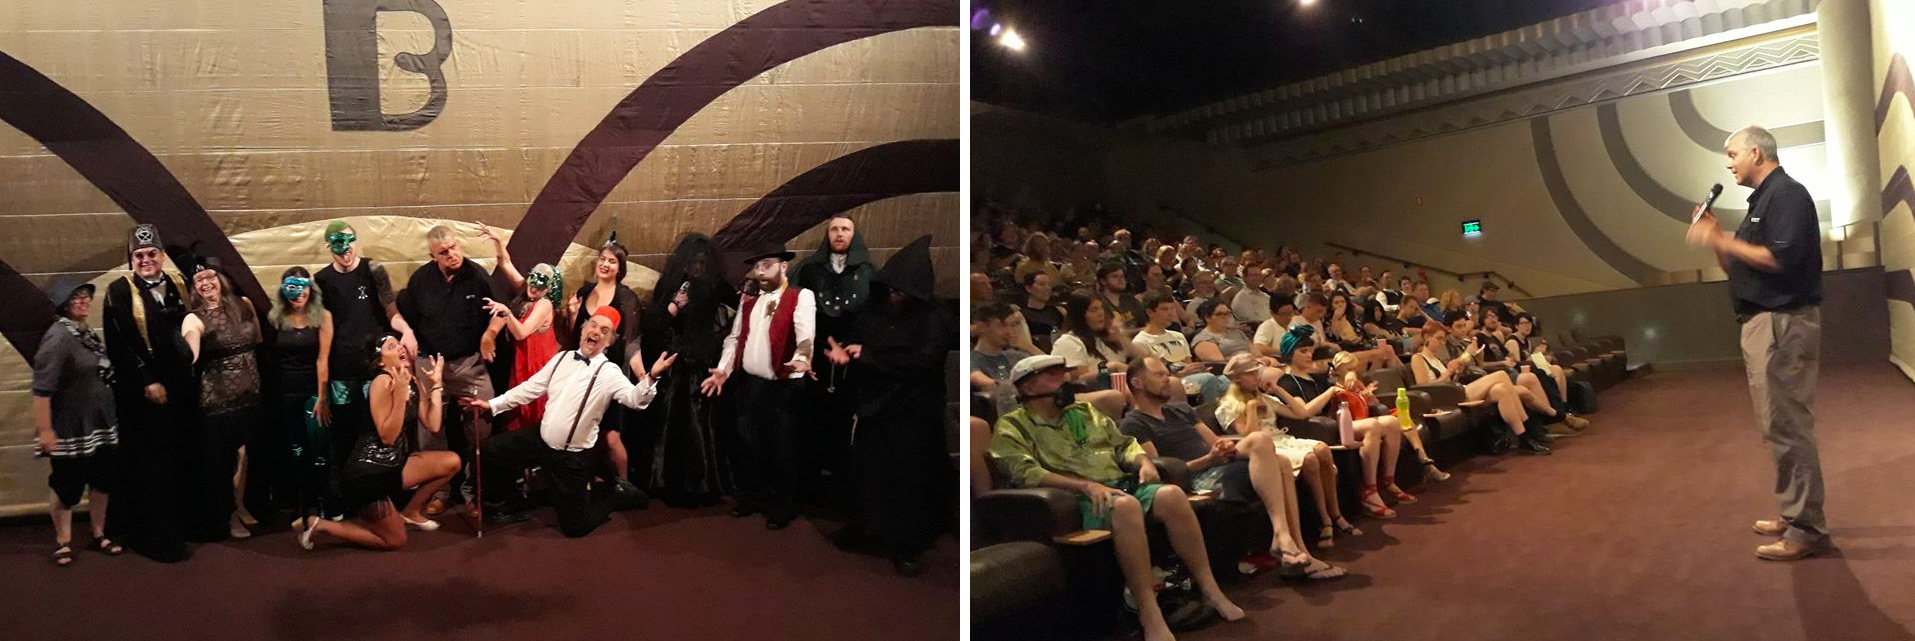 Screening The Call of Cthulhu at the Sun Theatre Melbourne, Jan 2019